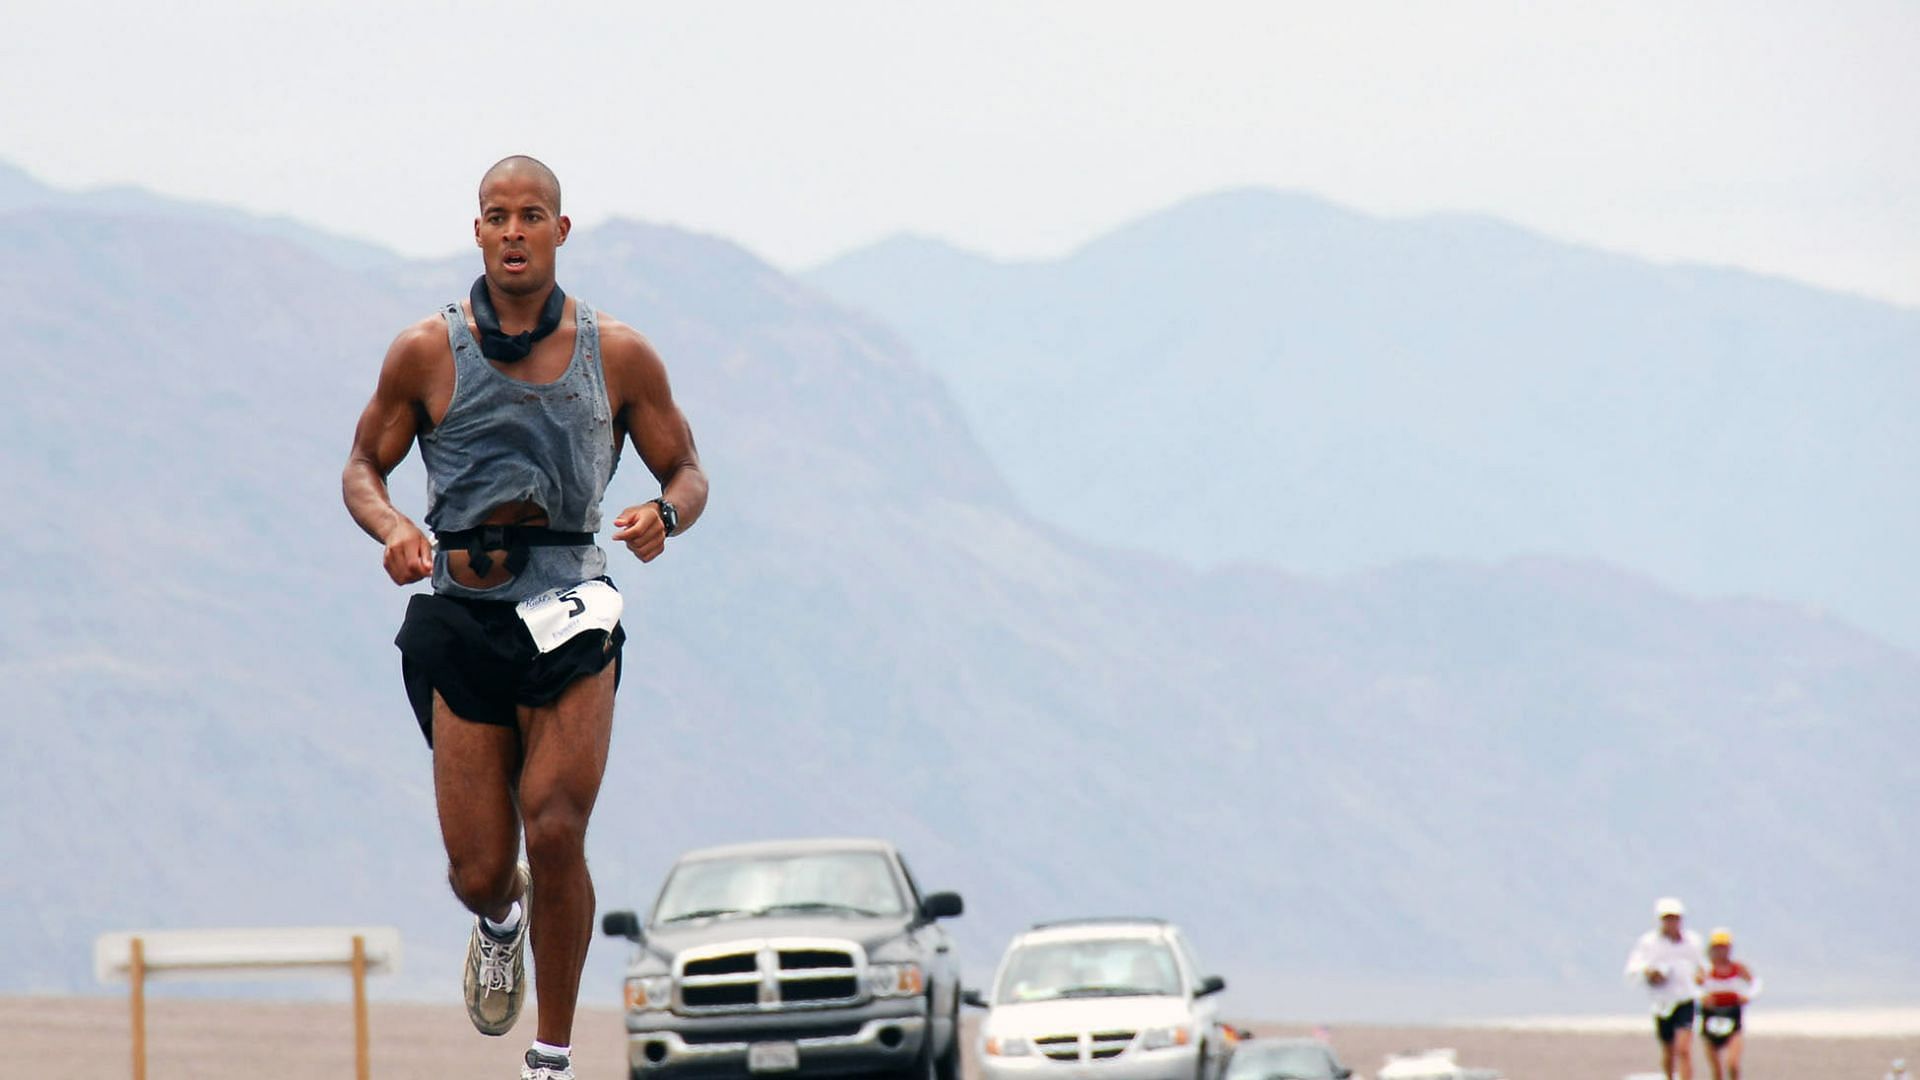 What Is The David Goggins Workout Routine And Diet Plan? - SET FOR SET